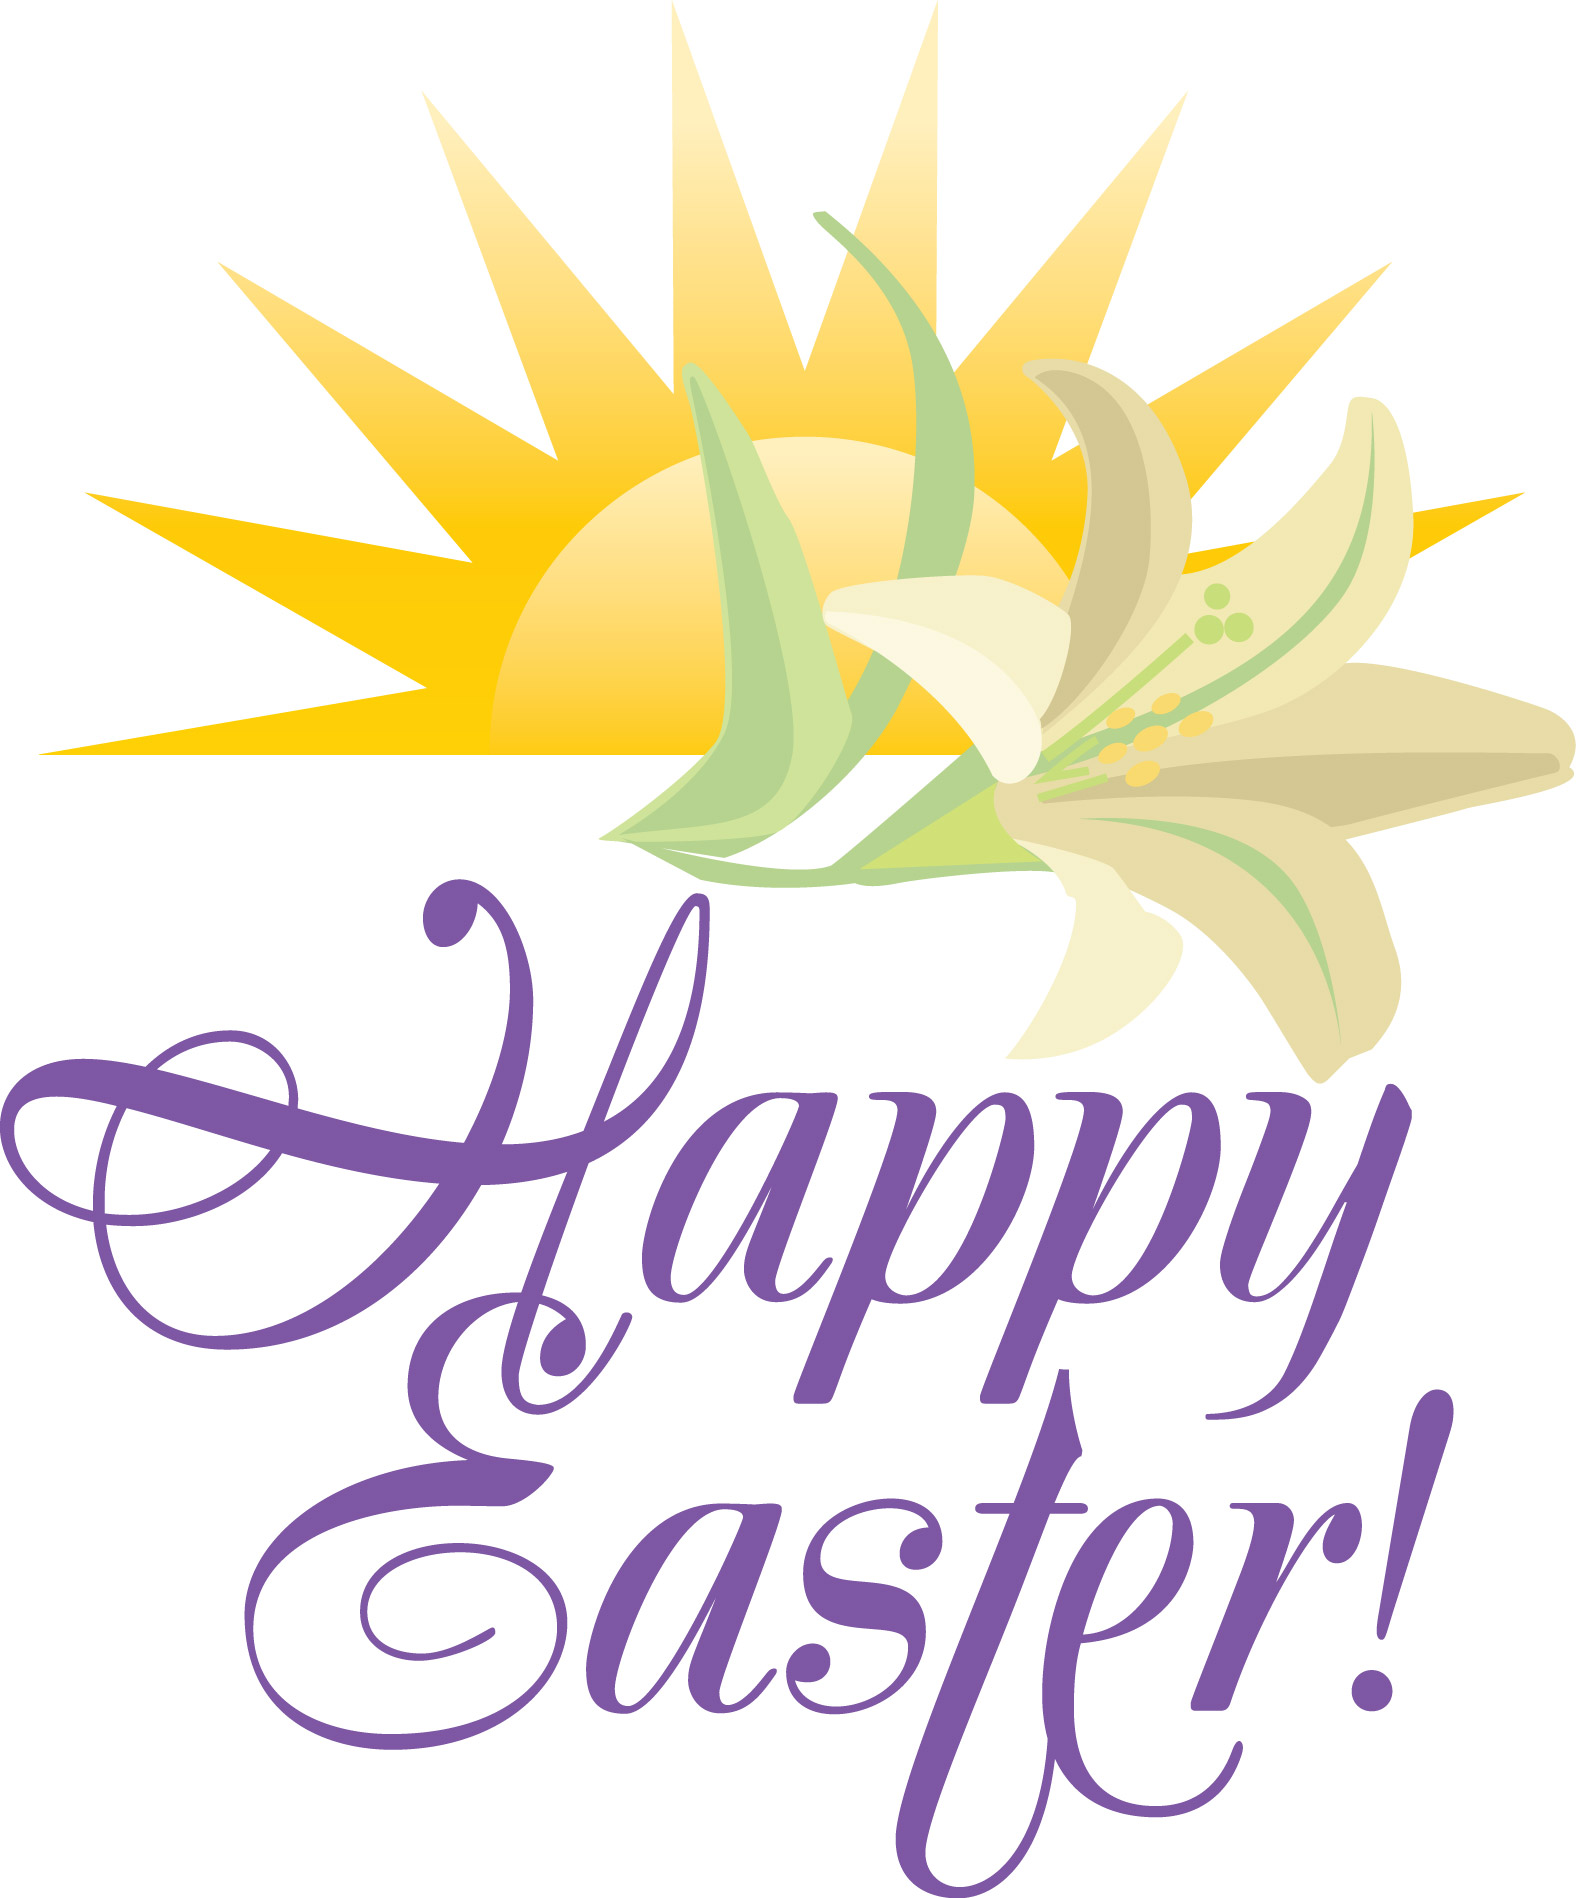 Easter Sunday Images Free Cli